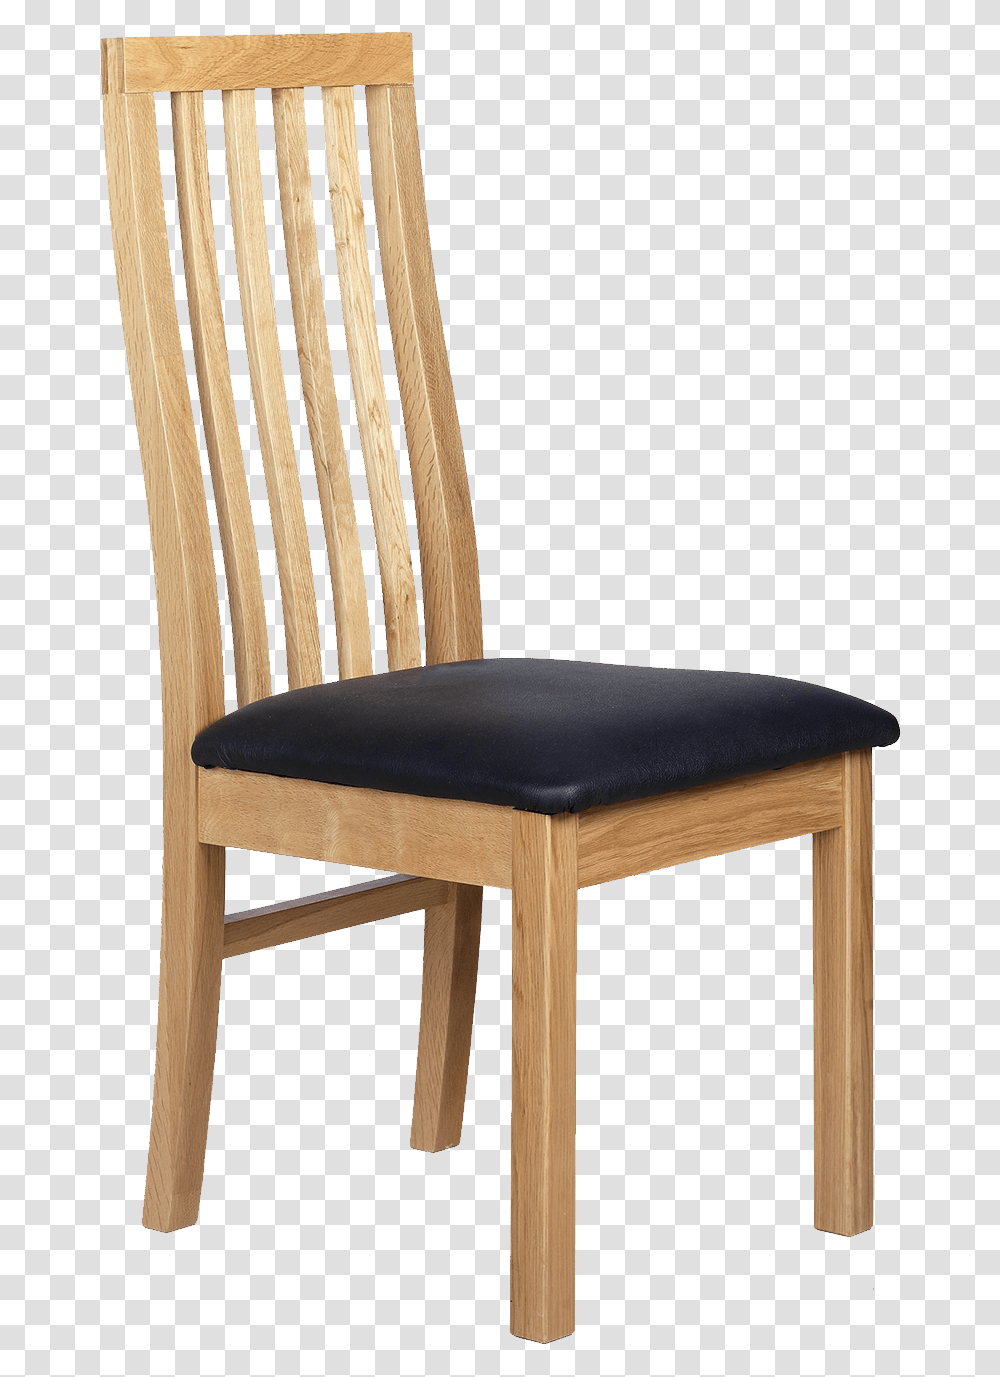 Download Hd Chair Images Free Background Chair, Furniture, Rug, Bar Stool Transparent Png